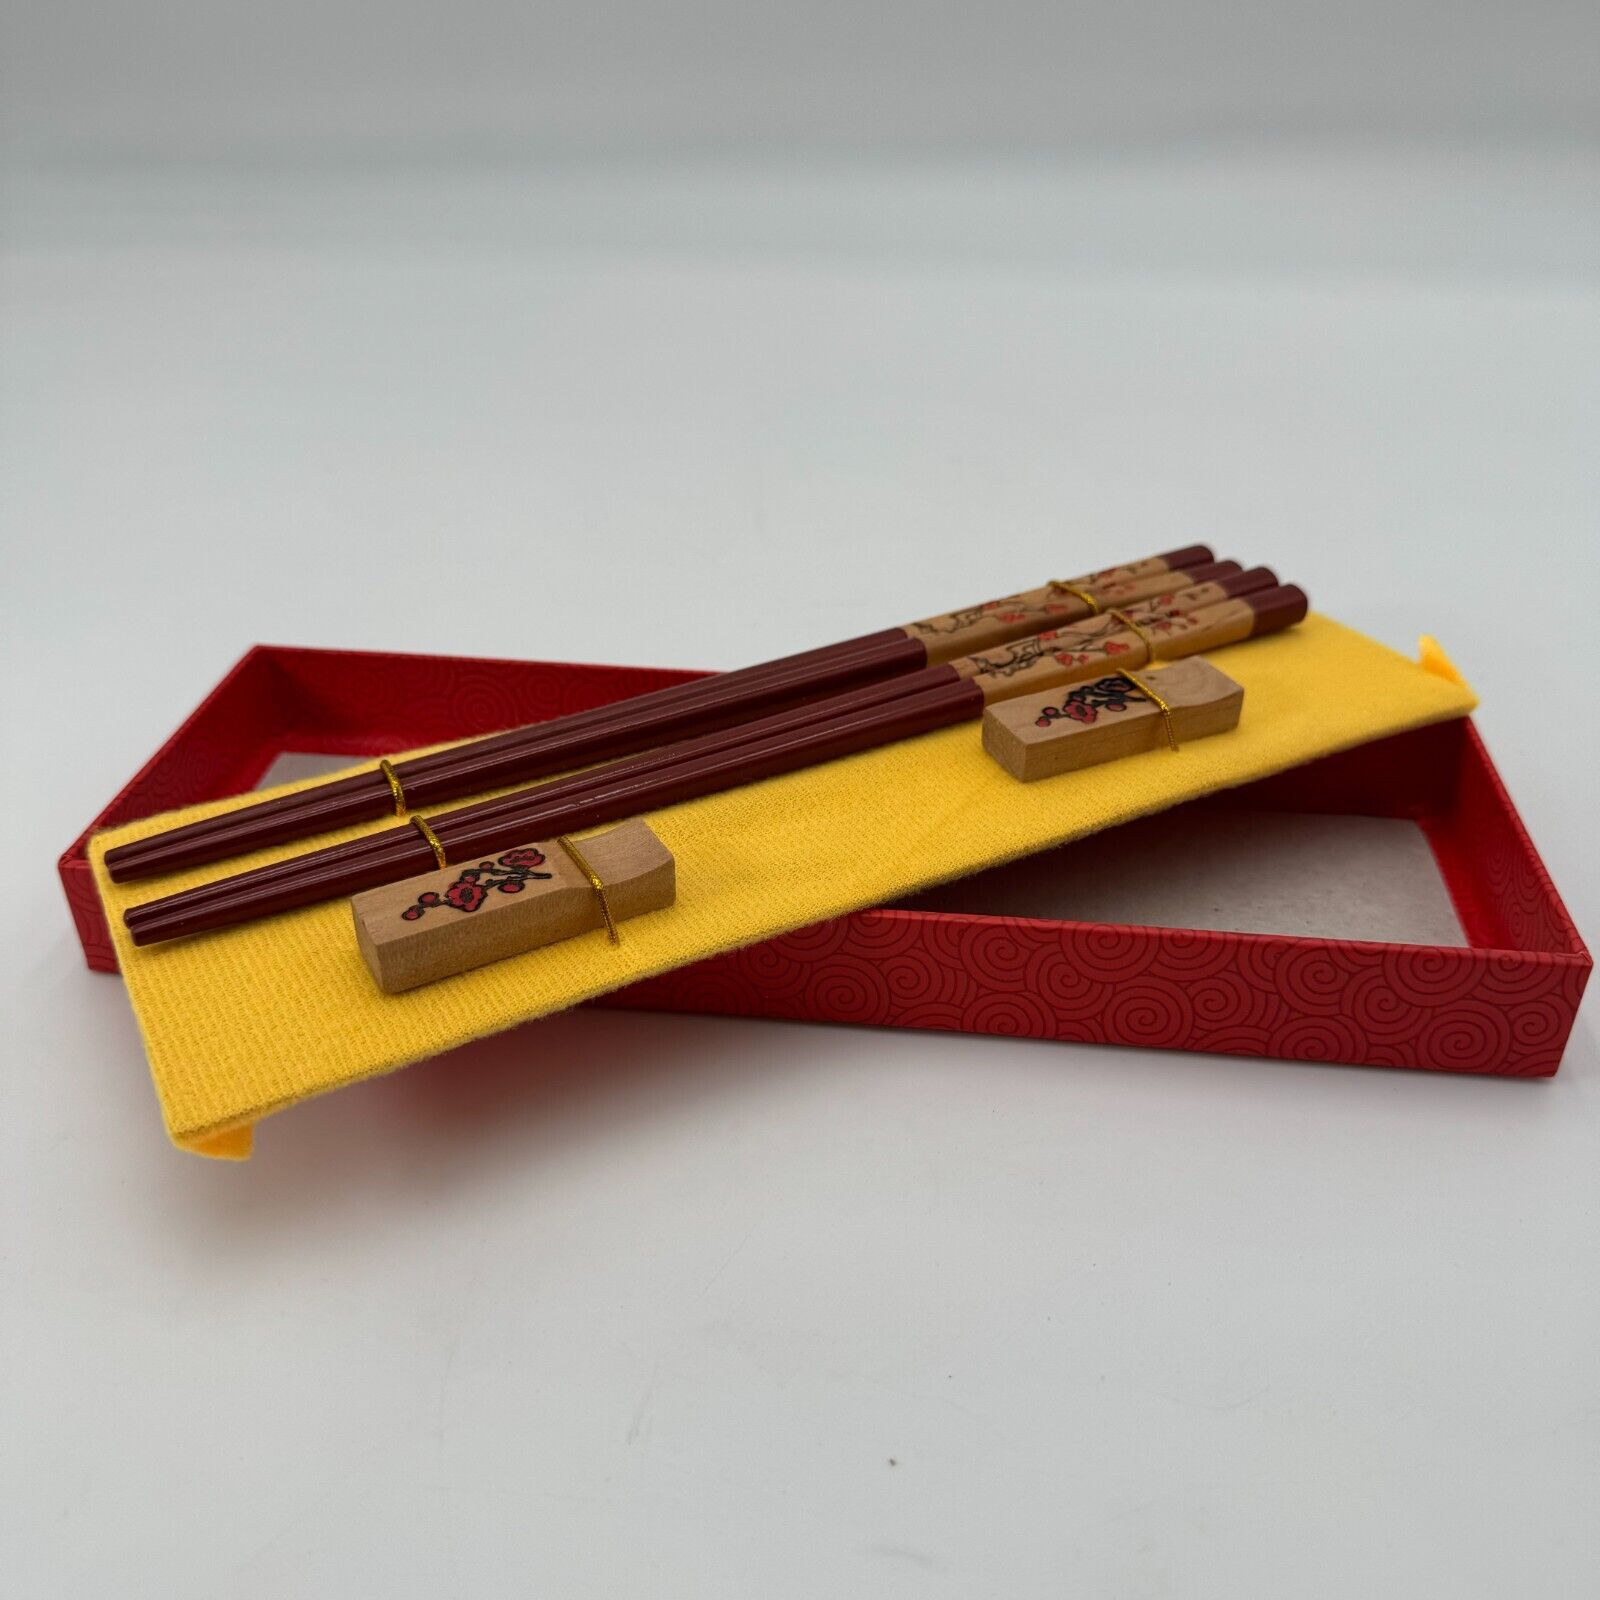 Authentic Chinese Chopsticks & Rests From China Red Floral Decorative Design NIB